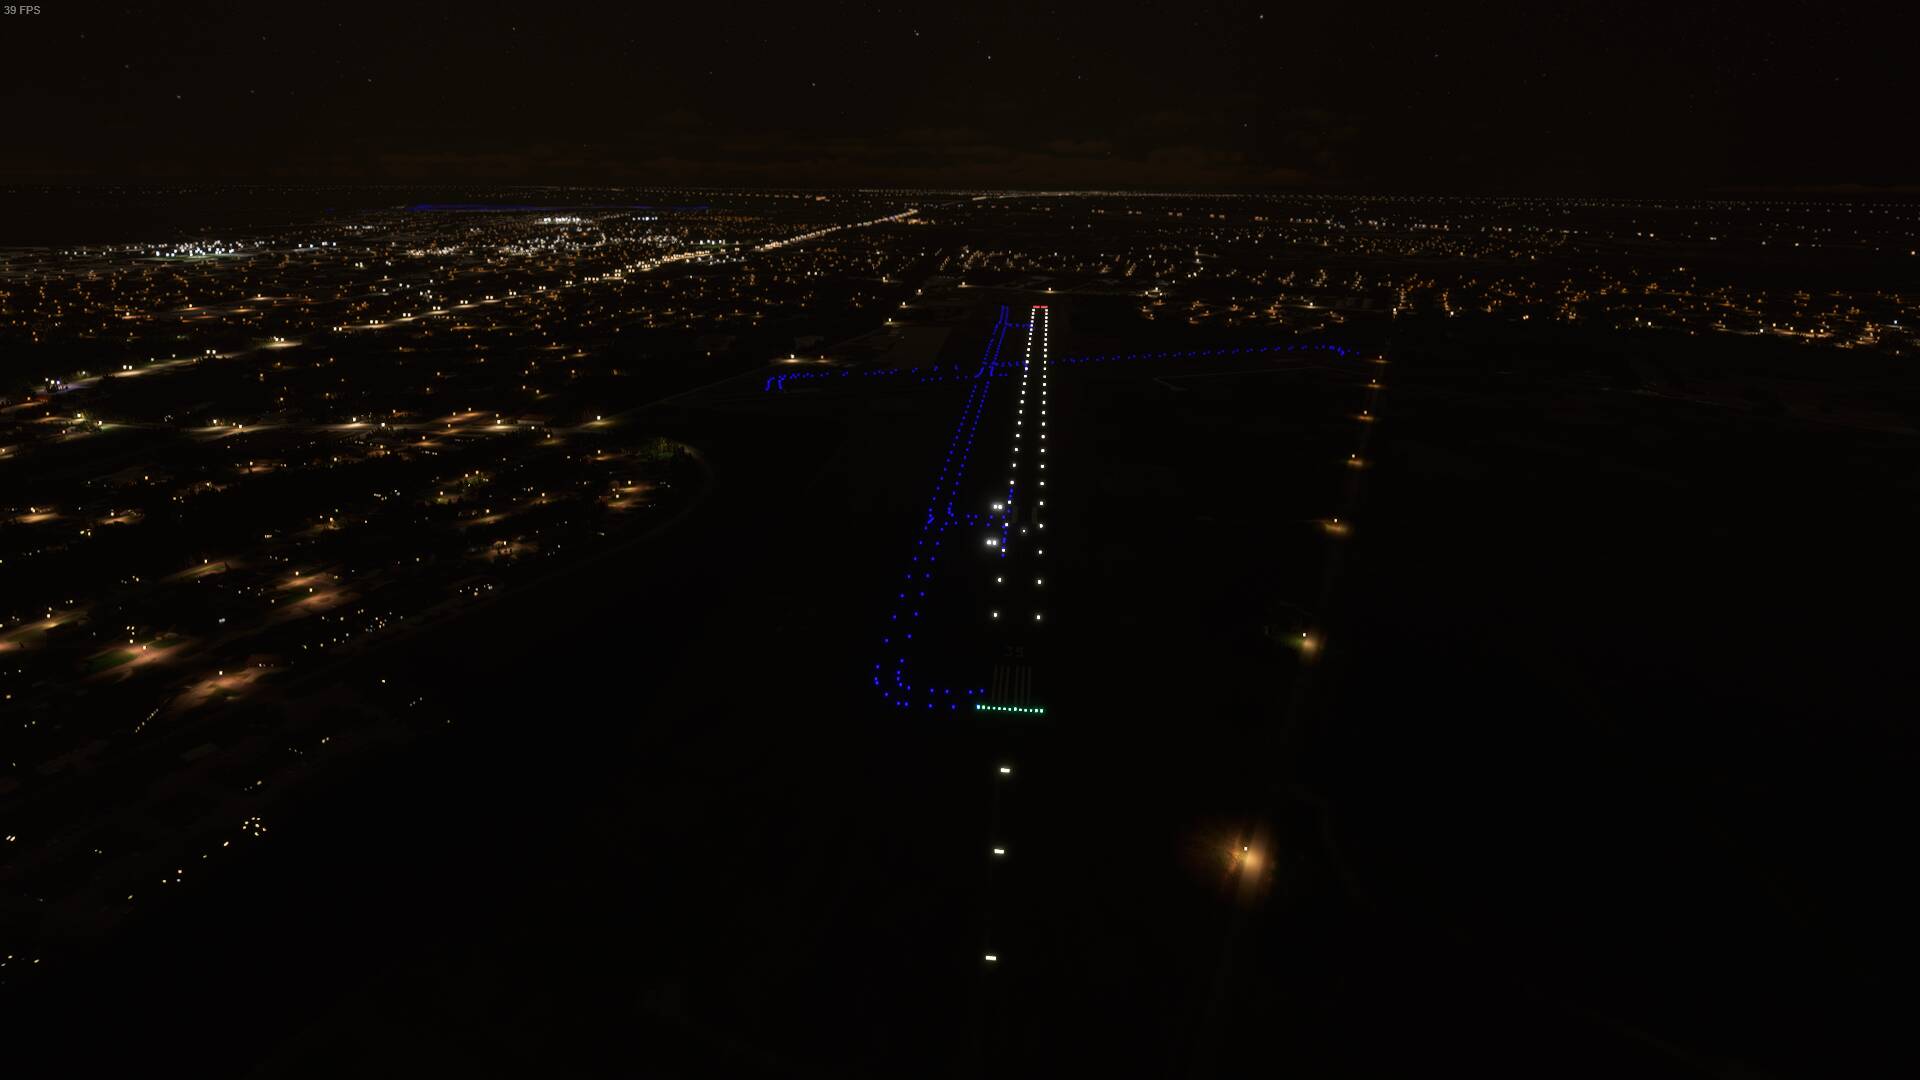 Unrealistic airport lighting distances - #61 by cdphotovideo - Scenery ...